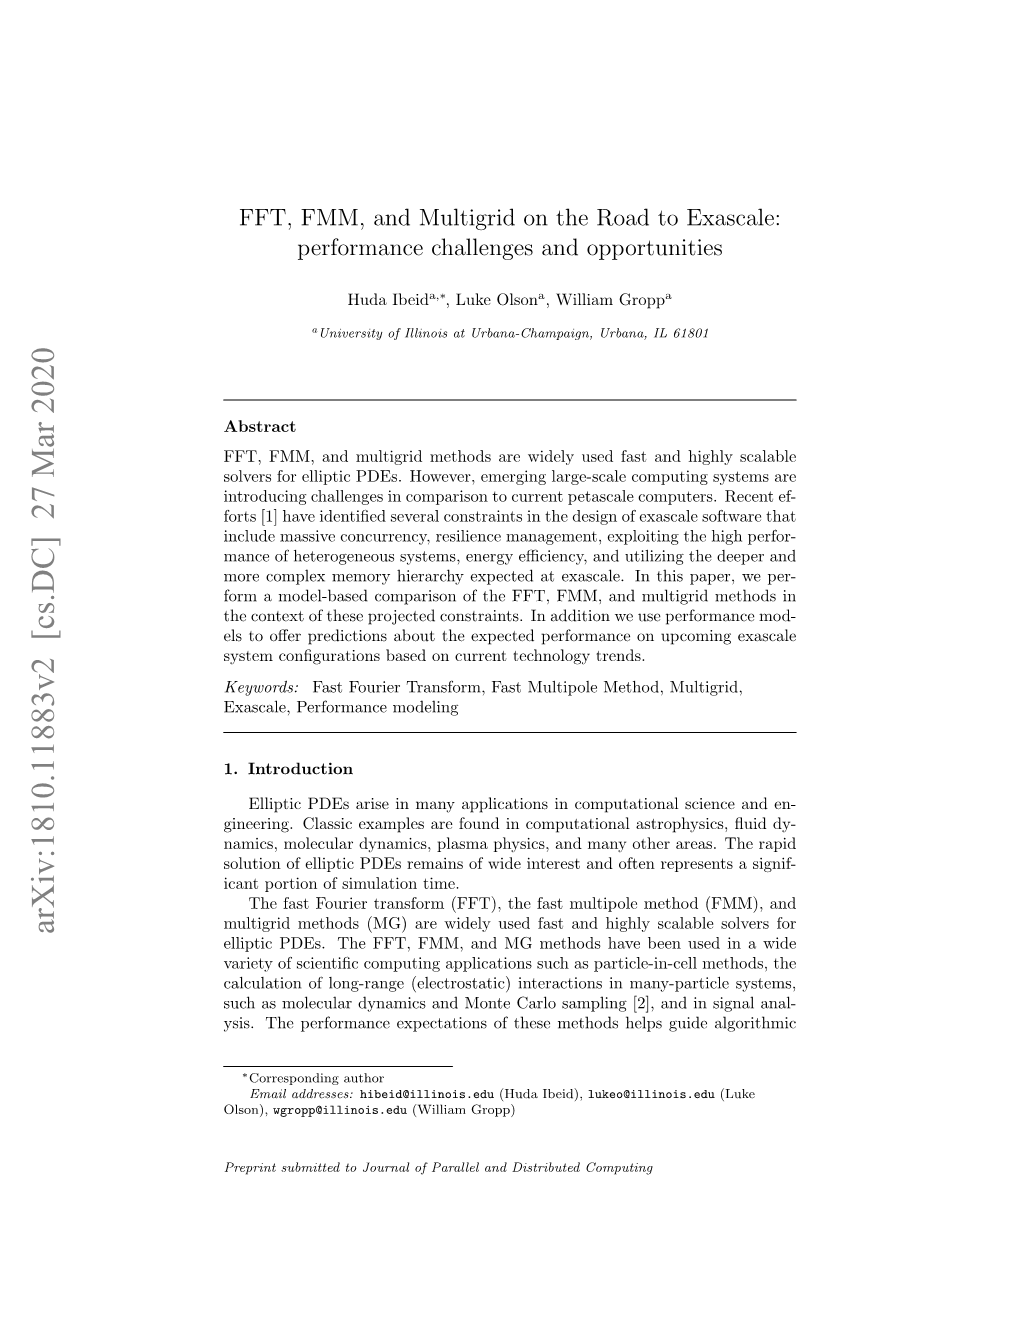 FFT, FMM, and Multigrid on the Road to Exascale: Performance Challenges and Opportunities